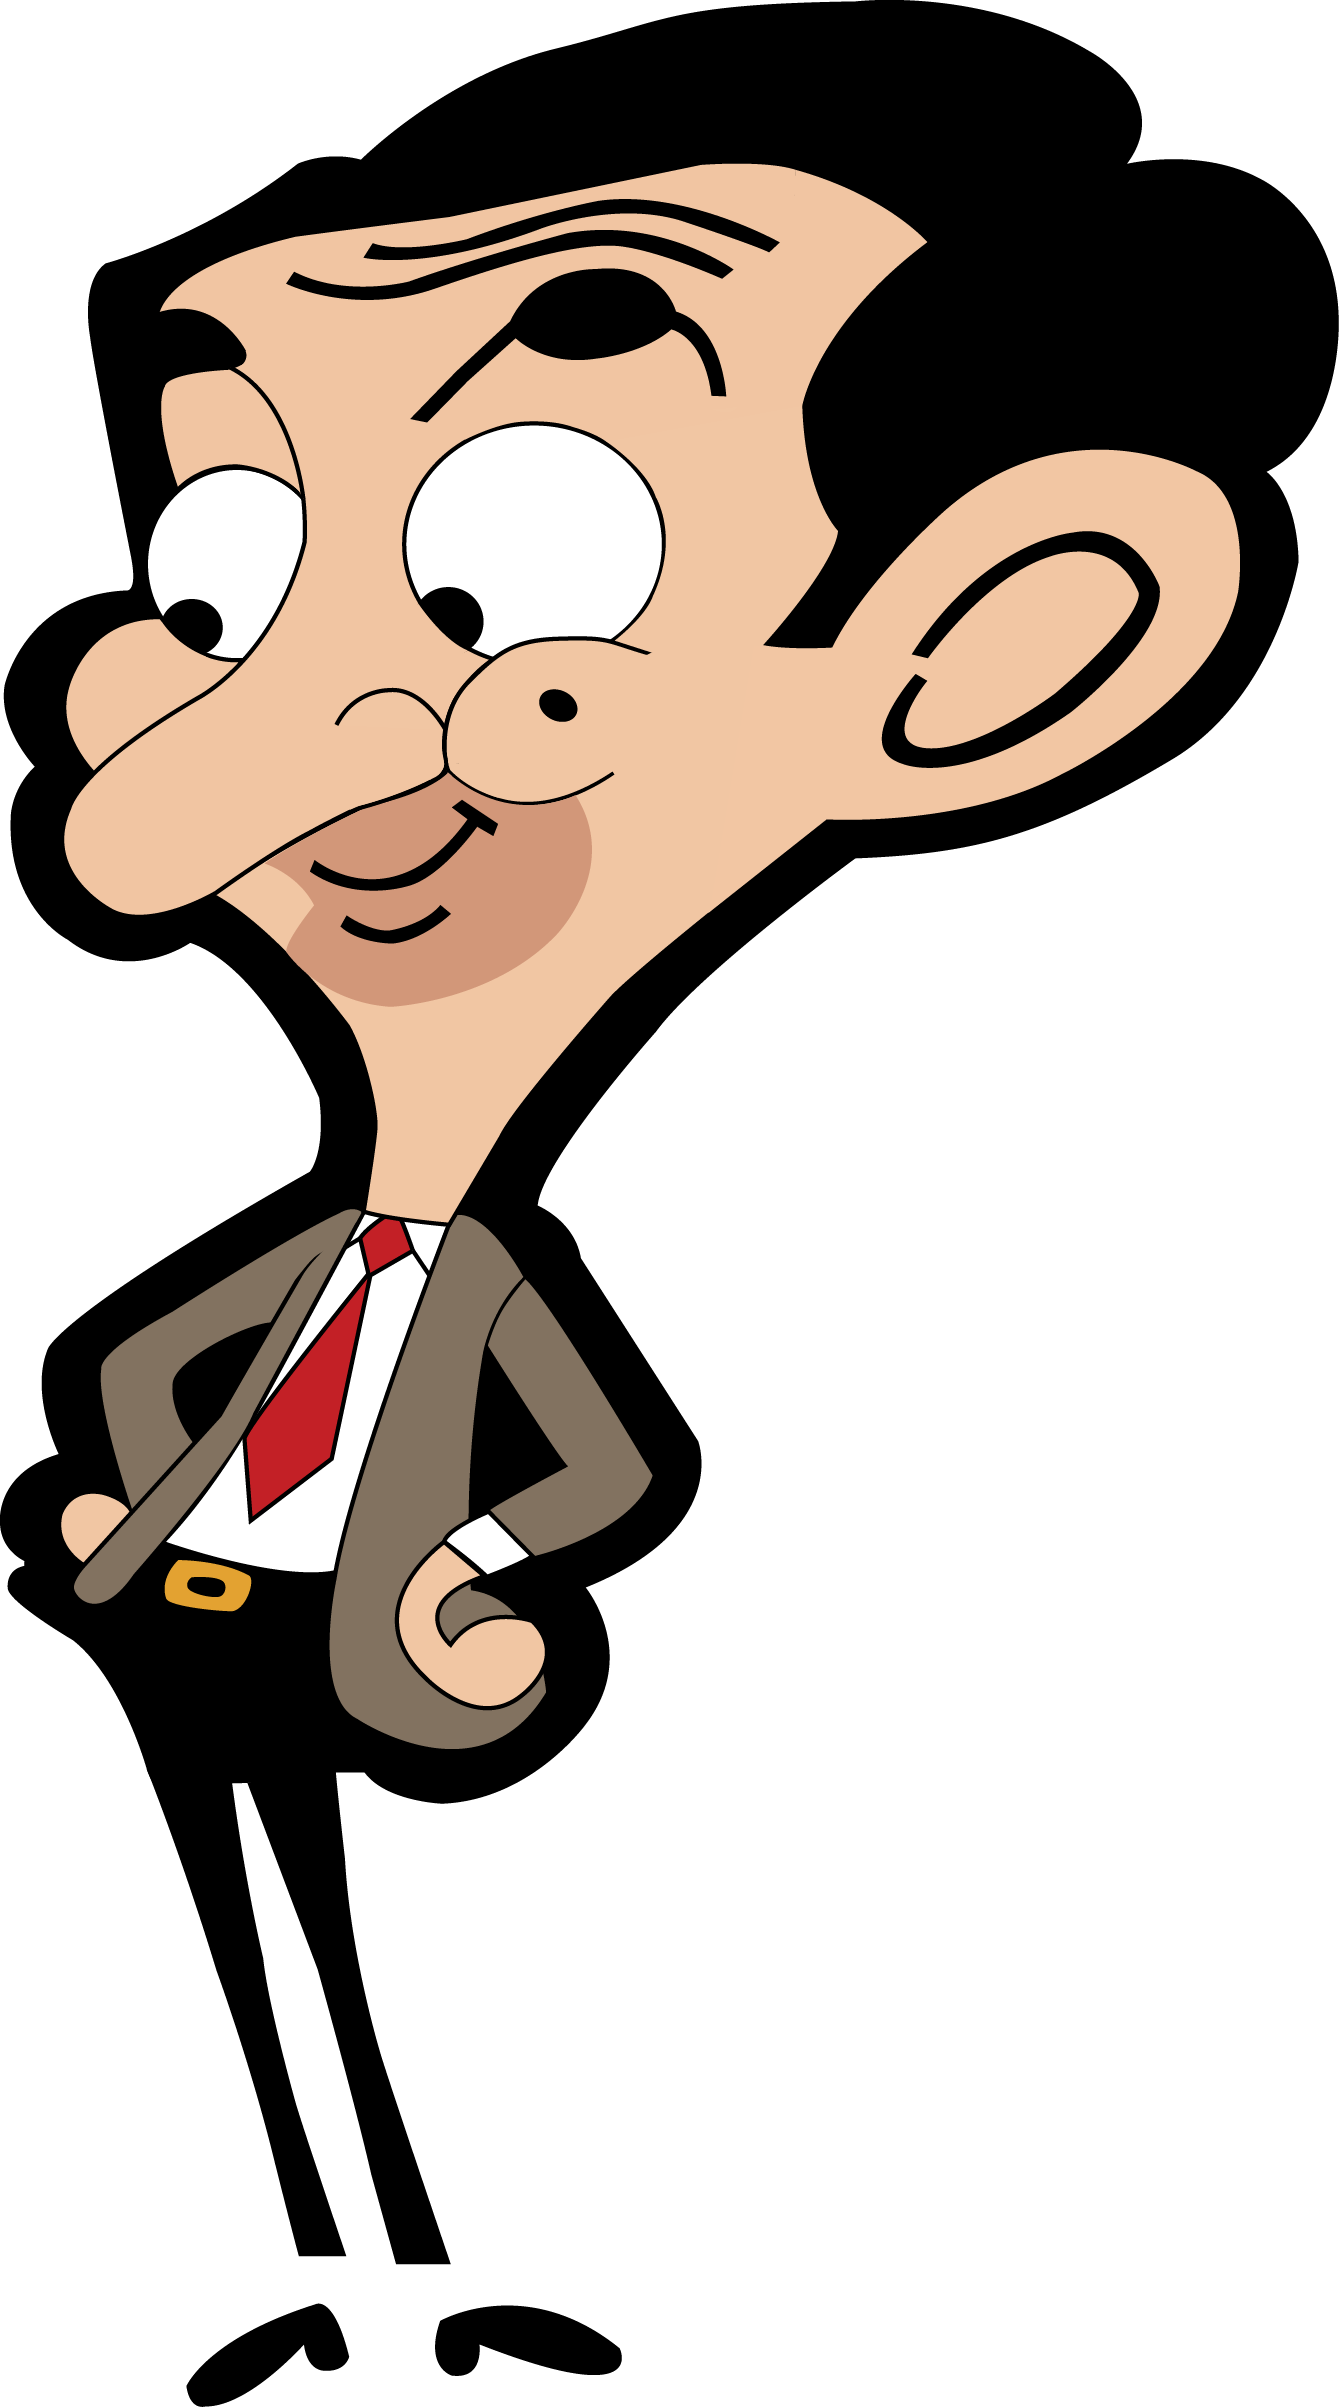 Mr. Bean PNG Background